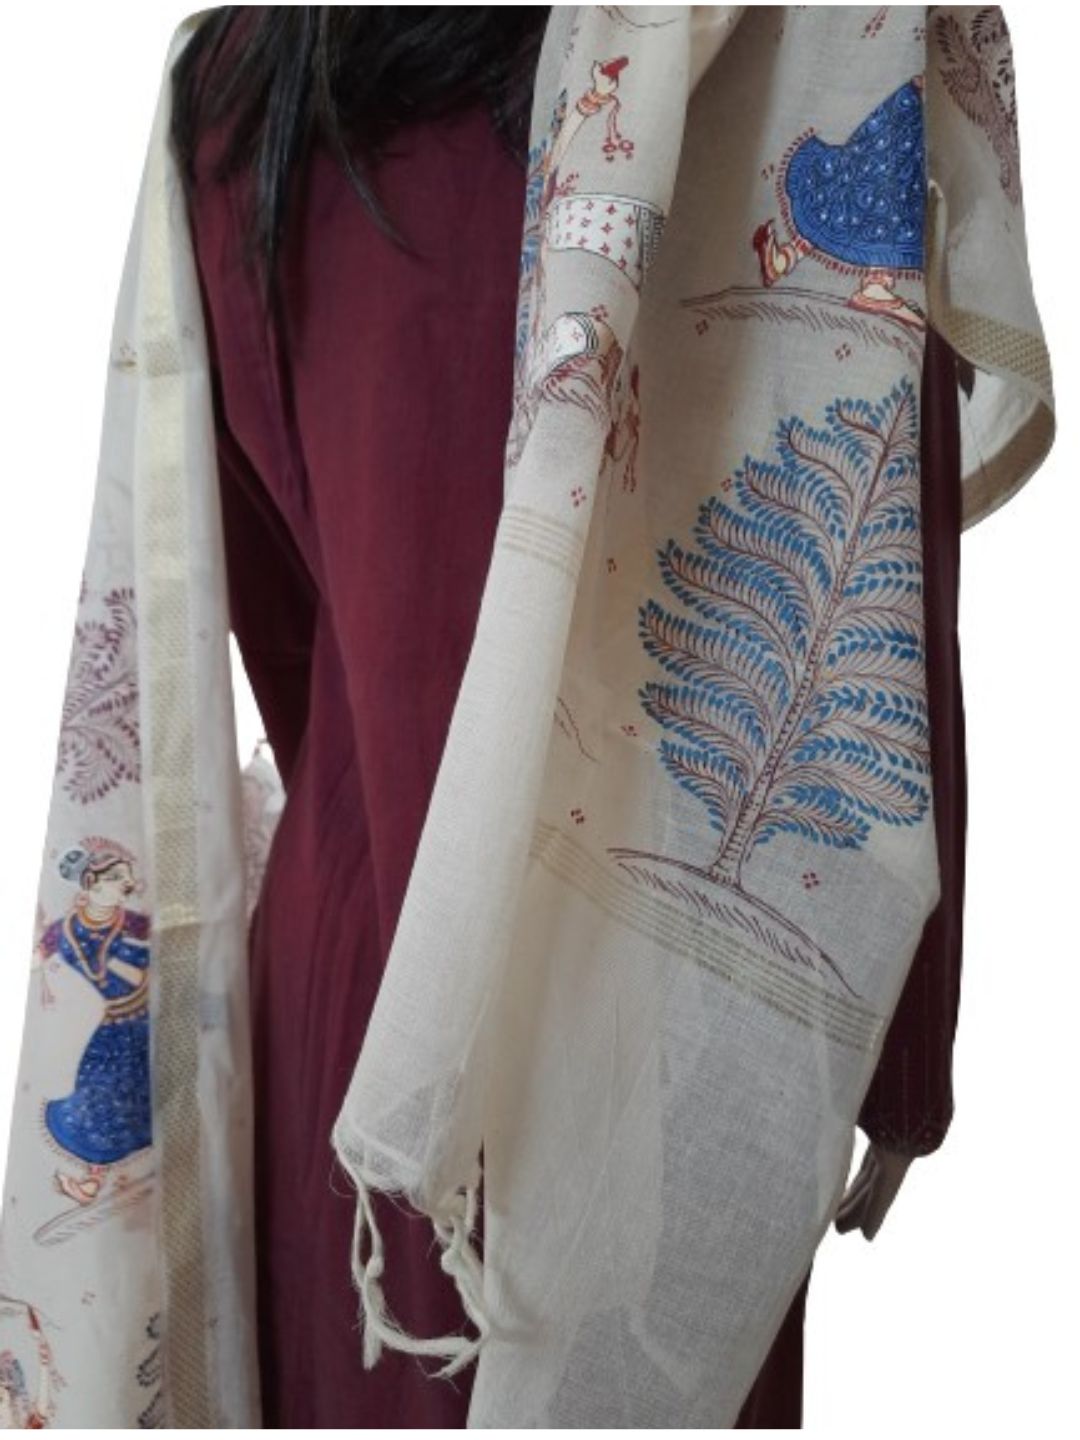 Off-white Cotton Dupatta with hand-painted Pattachitra motifs